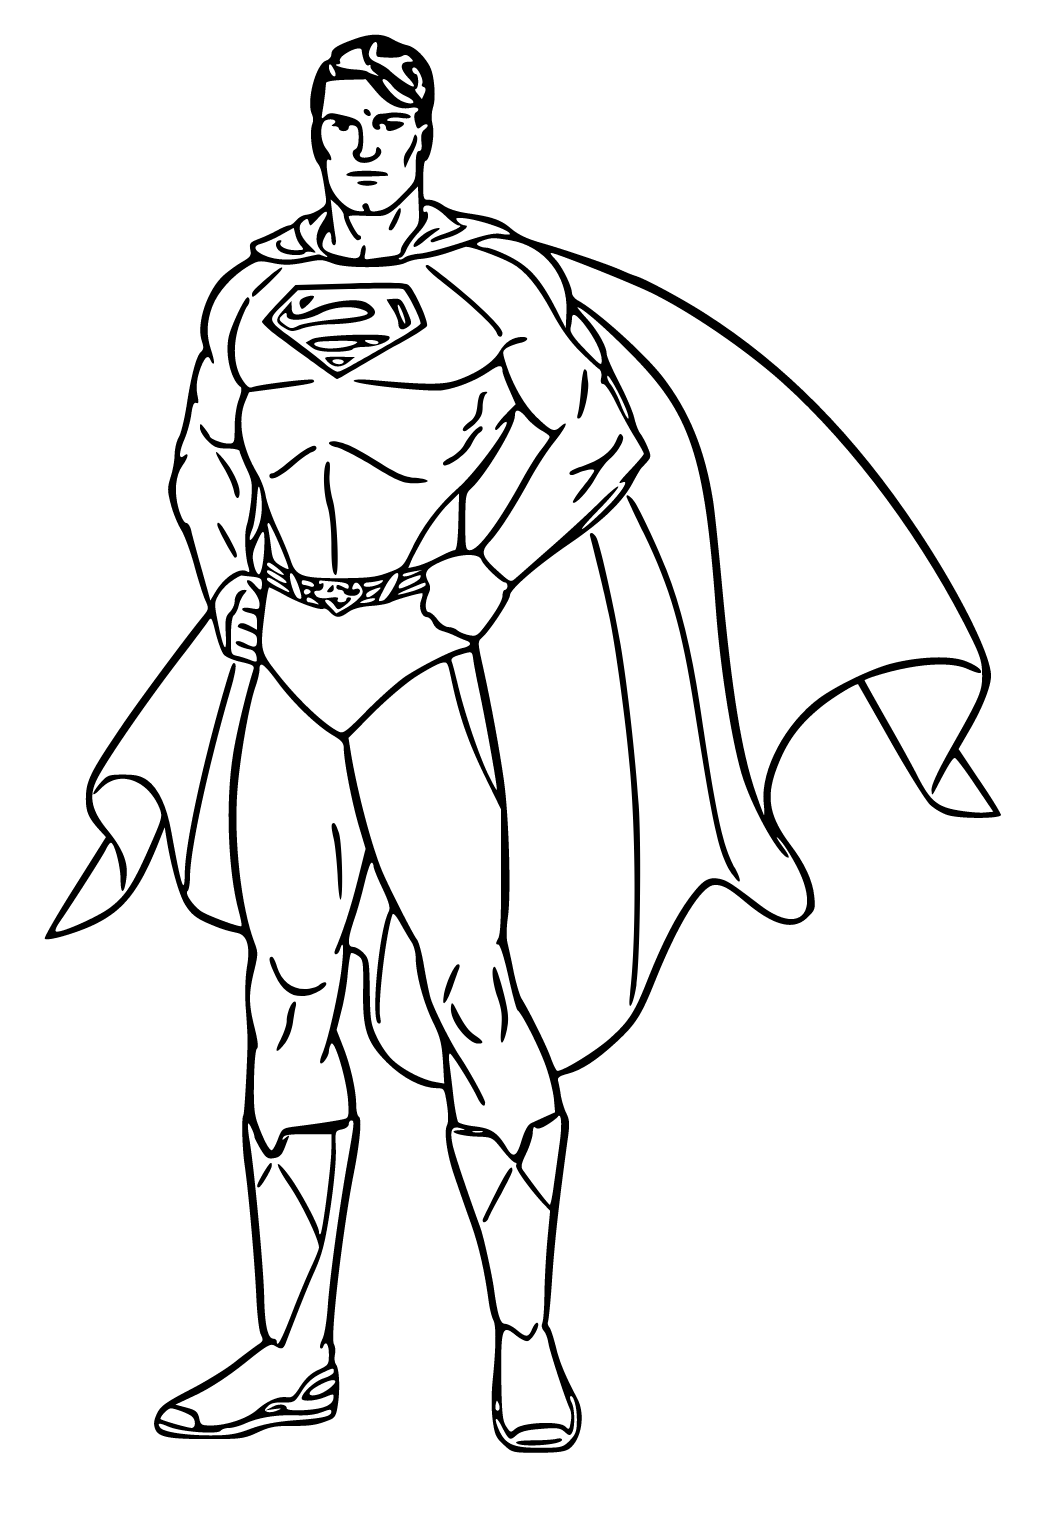 Free printable superman cloak coloring page for adults and kids